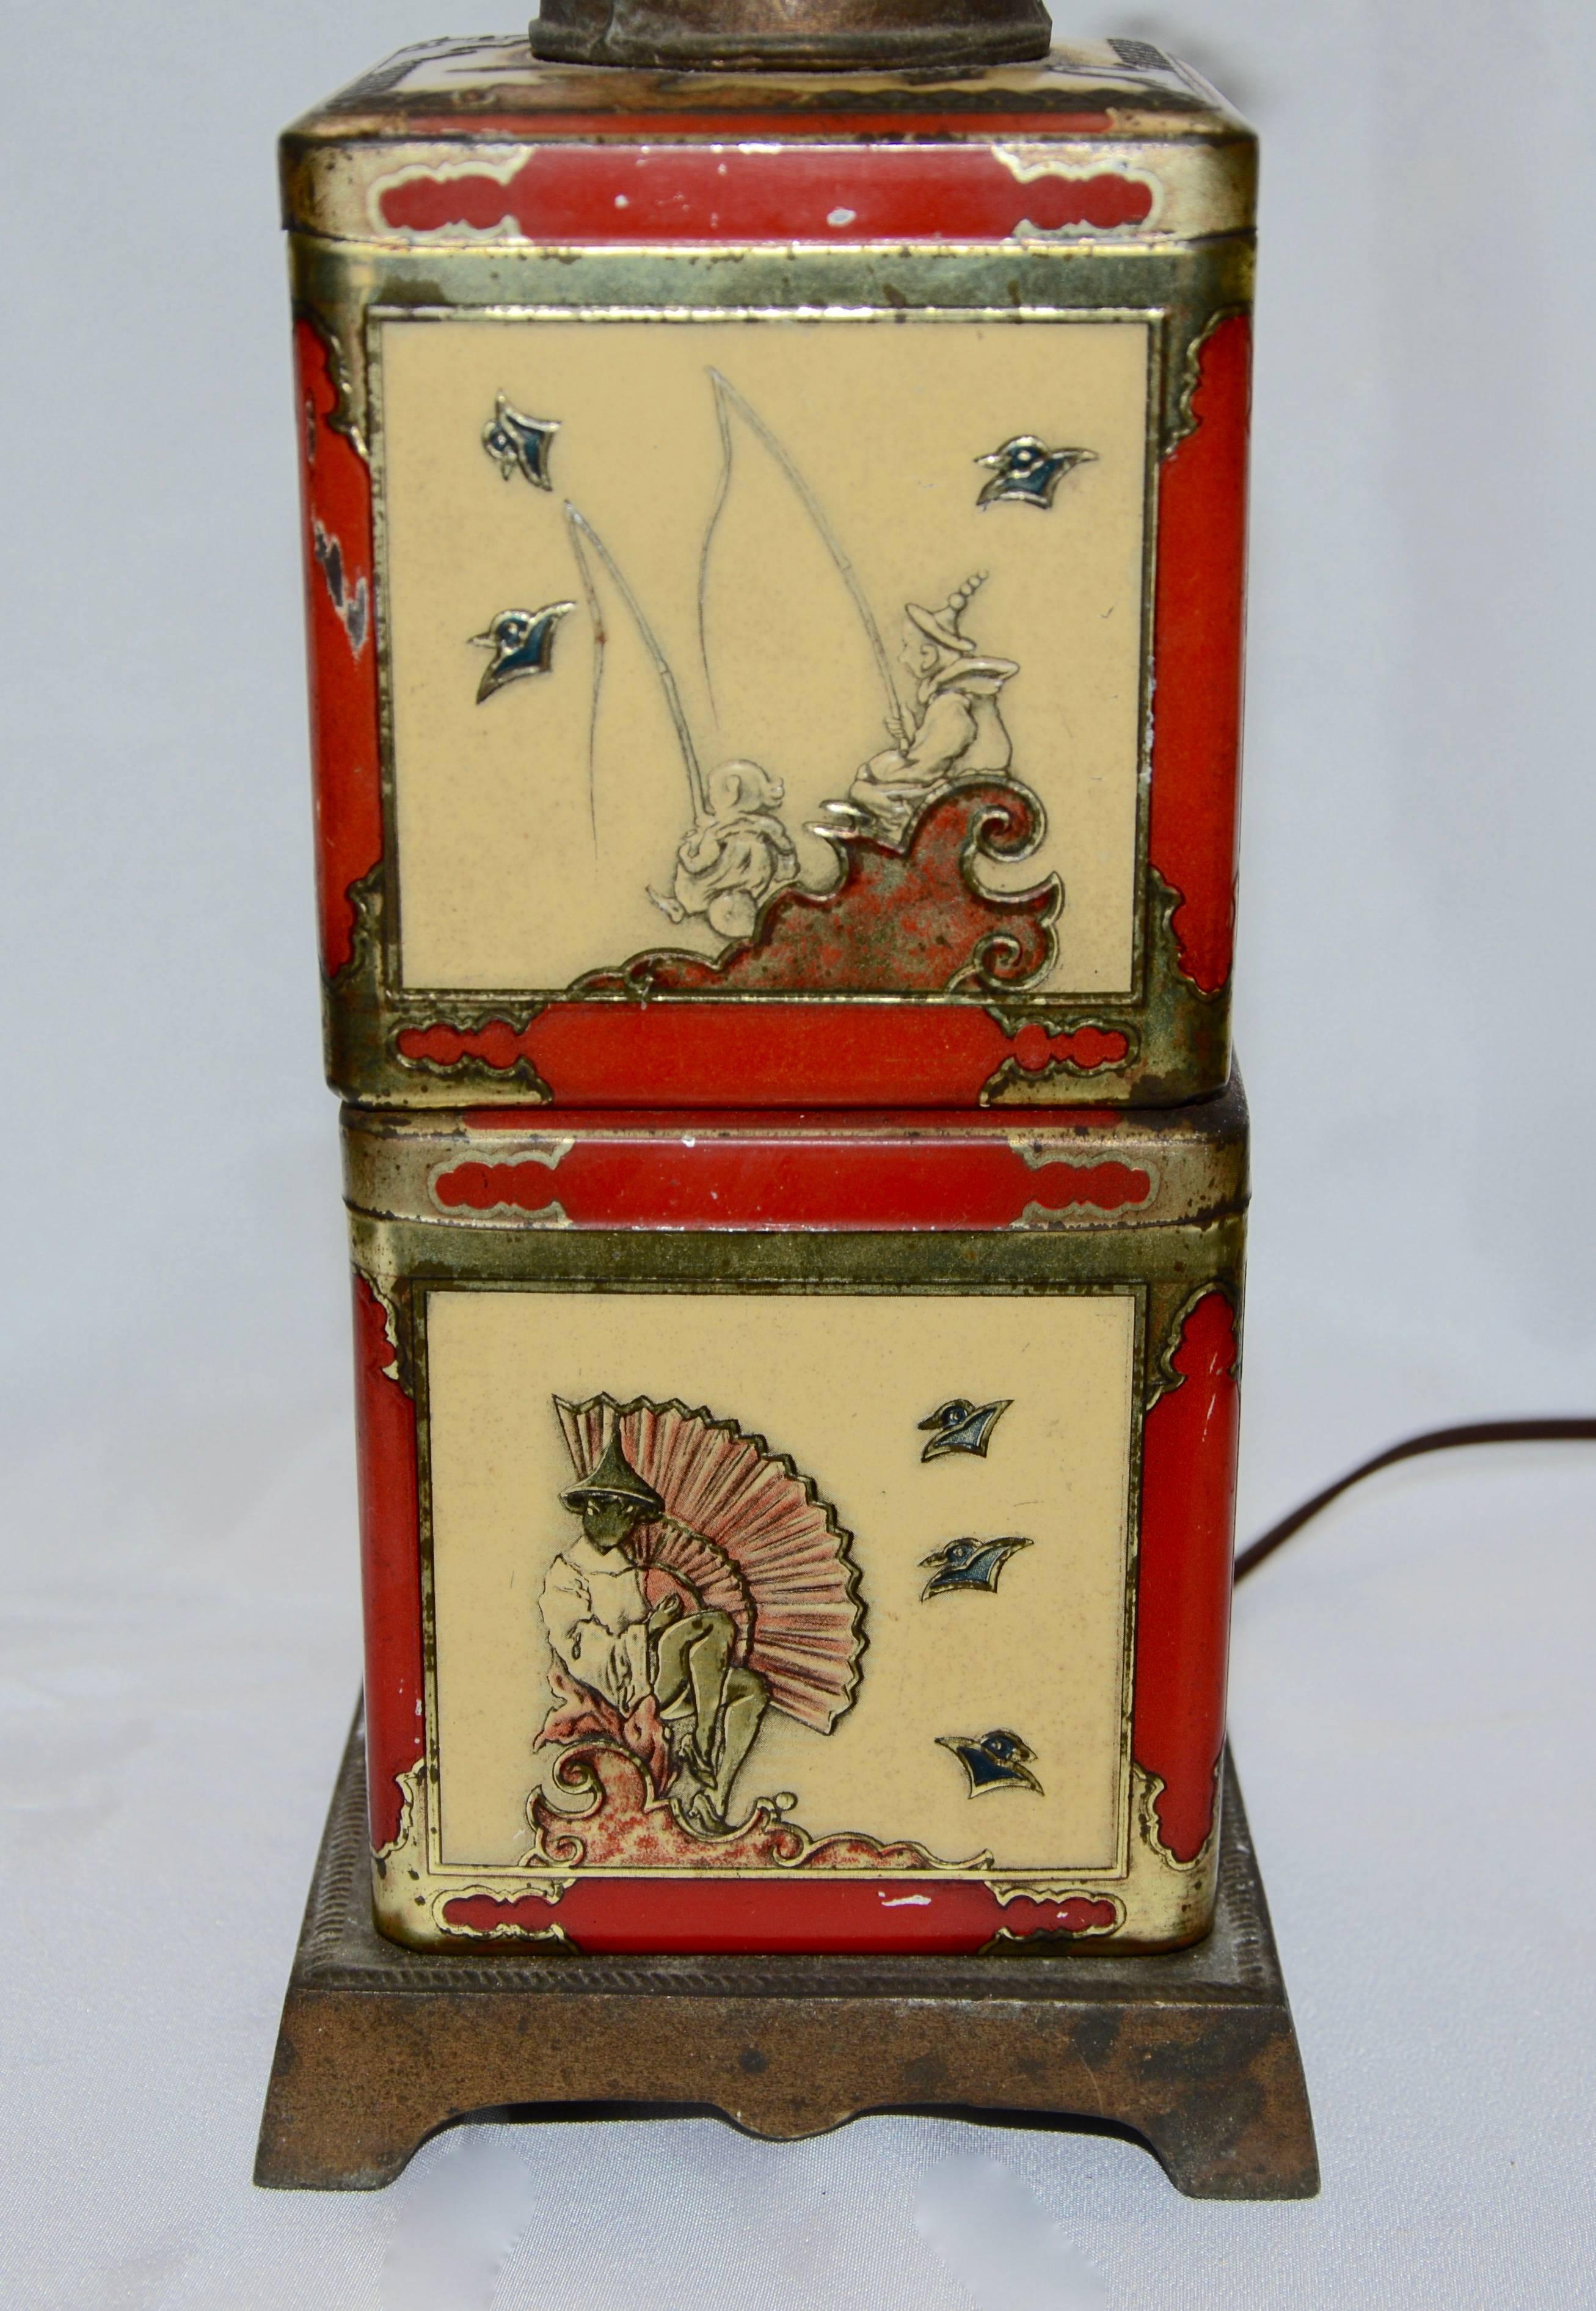 A pair of Asian antique tea tins make up this electric table lamp that was designed in the 1940s. The tins rest on a cast metal base. There are two different scenes on each tin. A cast metal piece with a faux key sits atop the tins and is completed